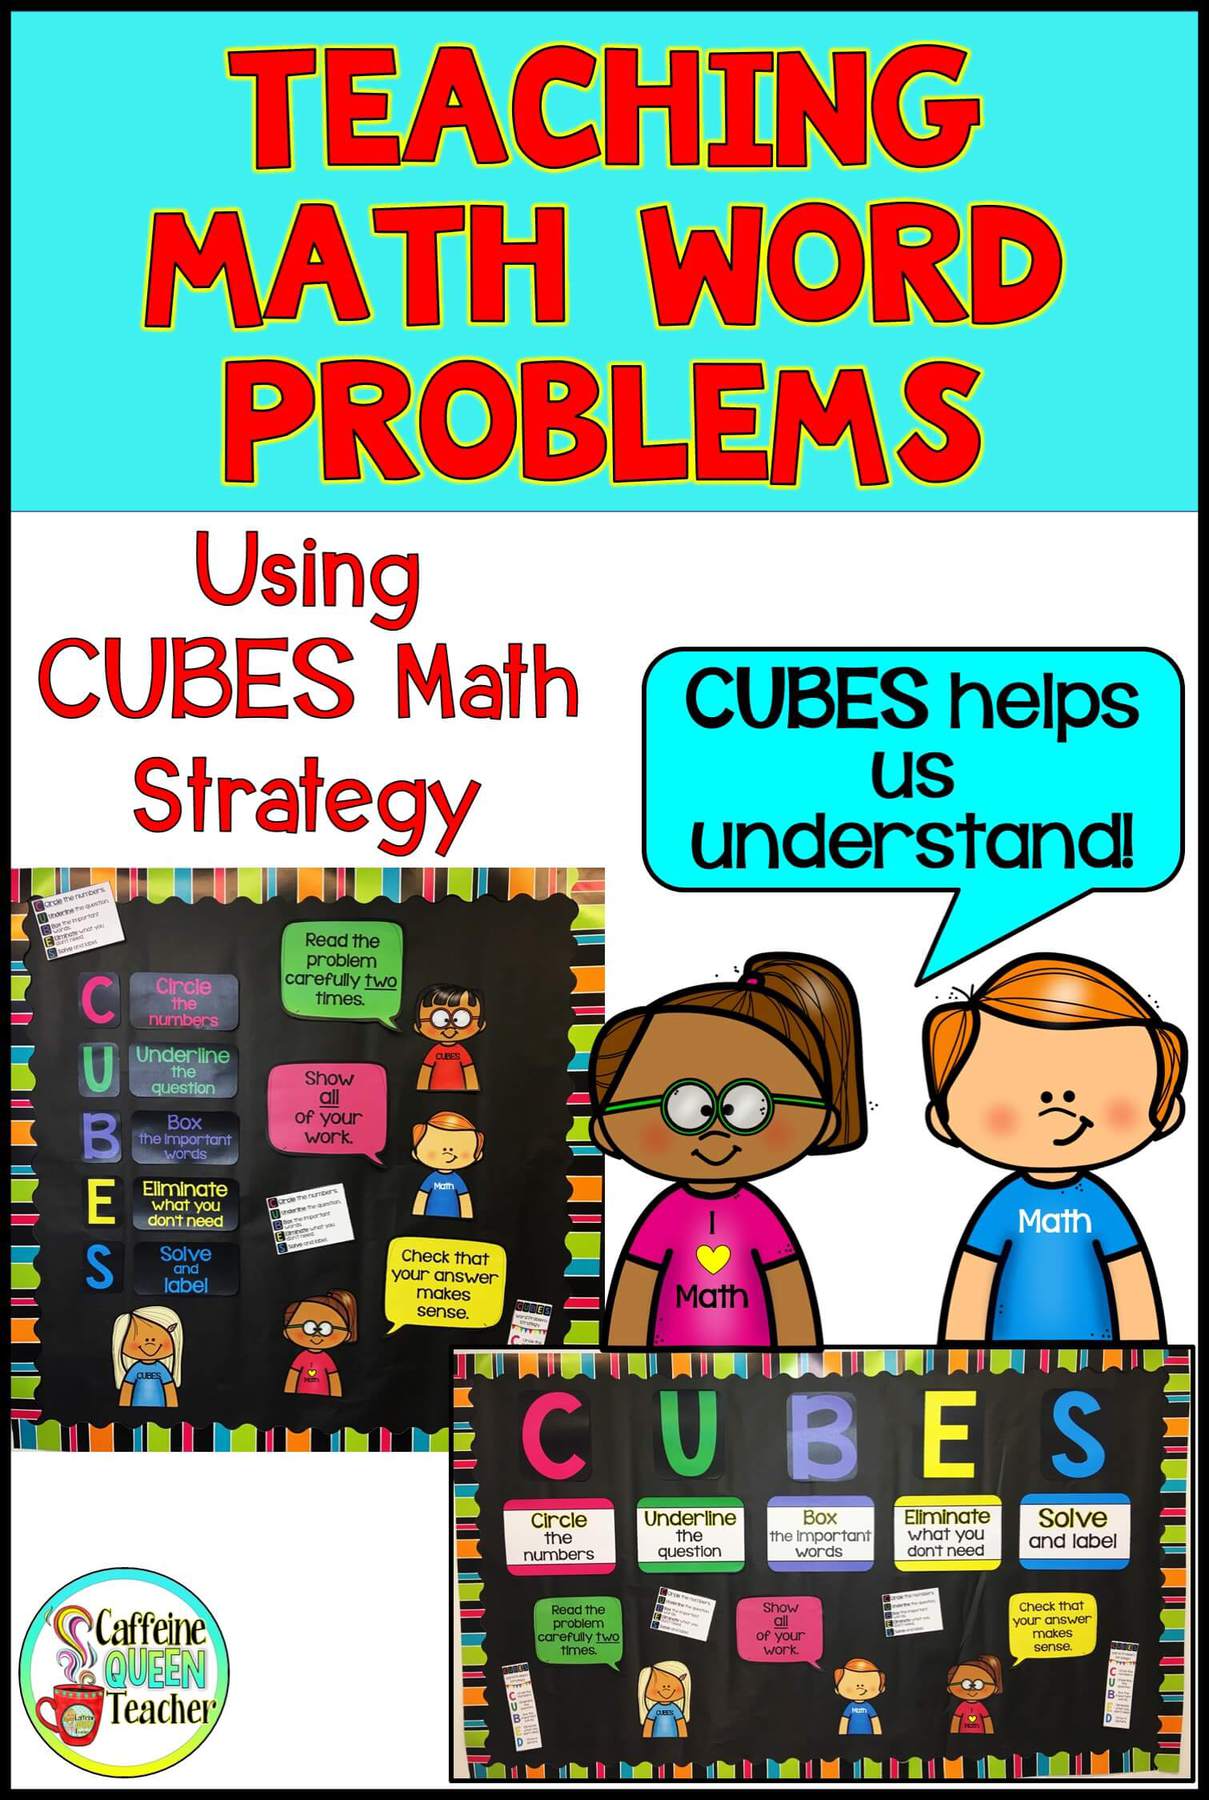 CUBES math strategy for word problems